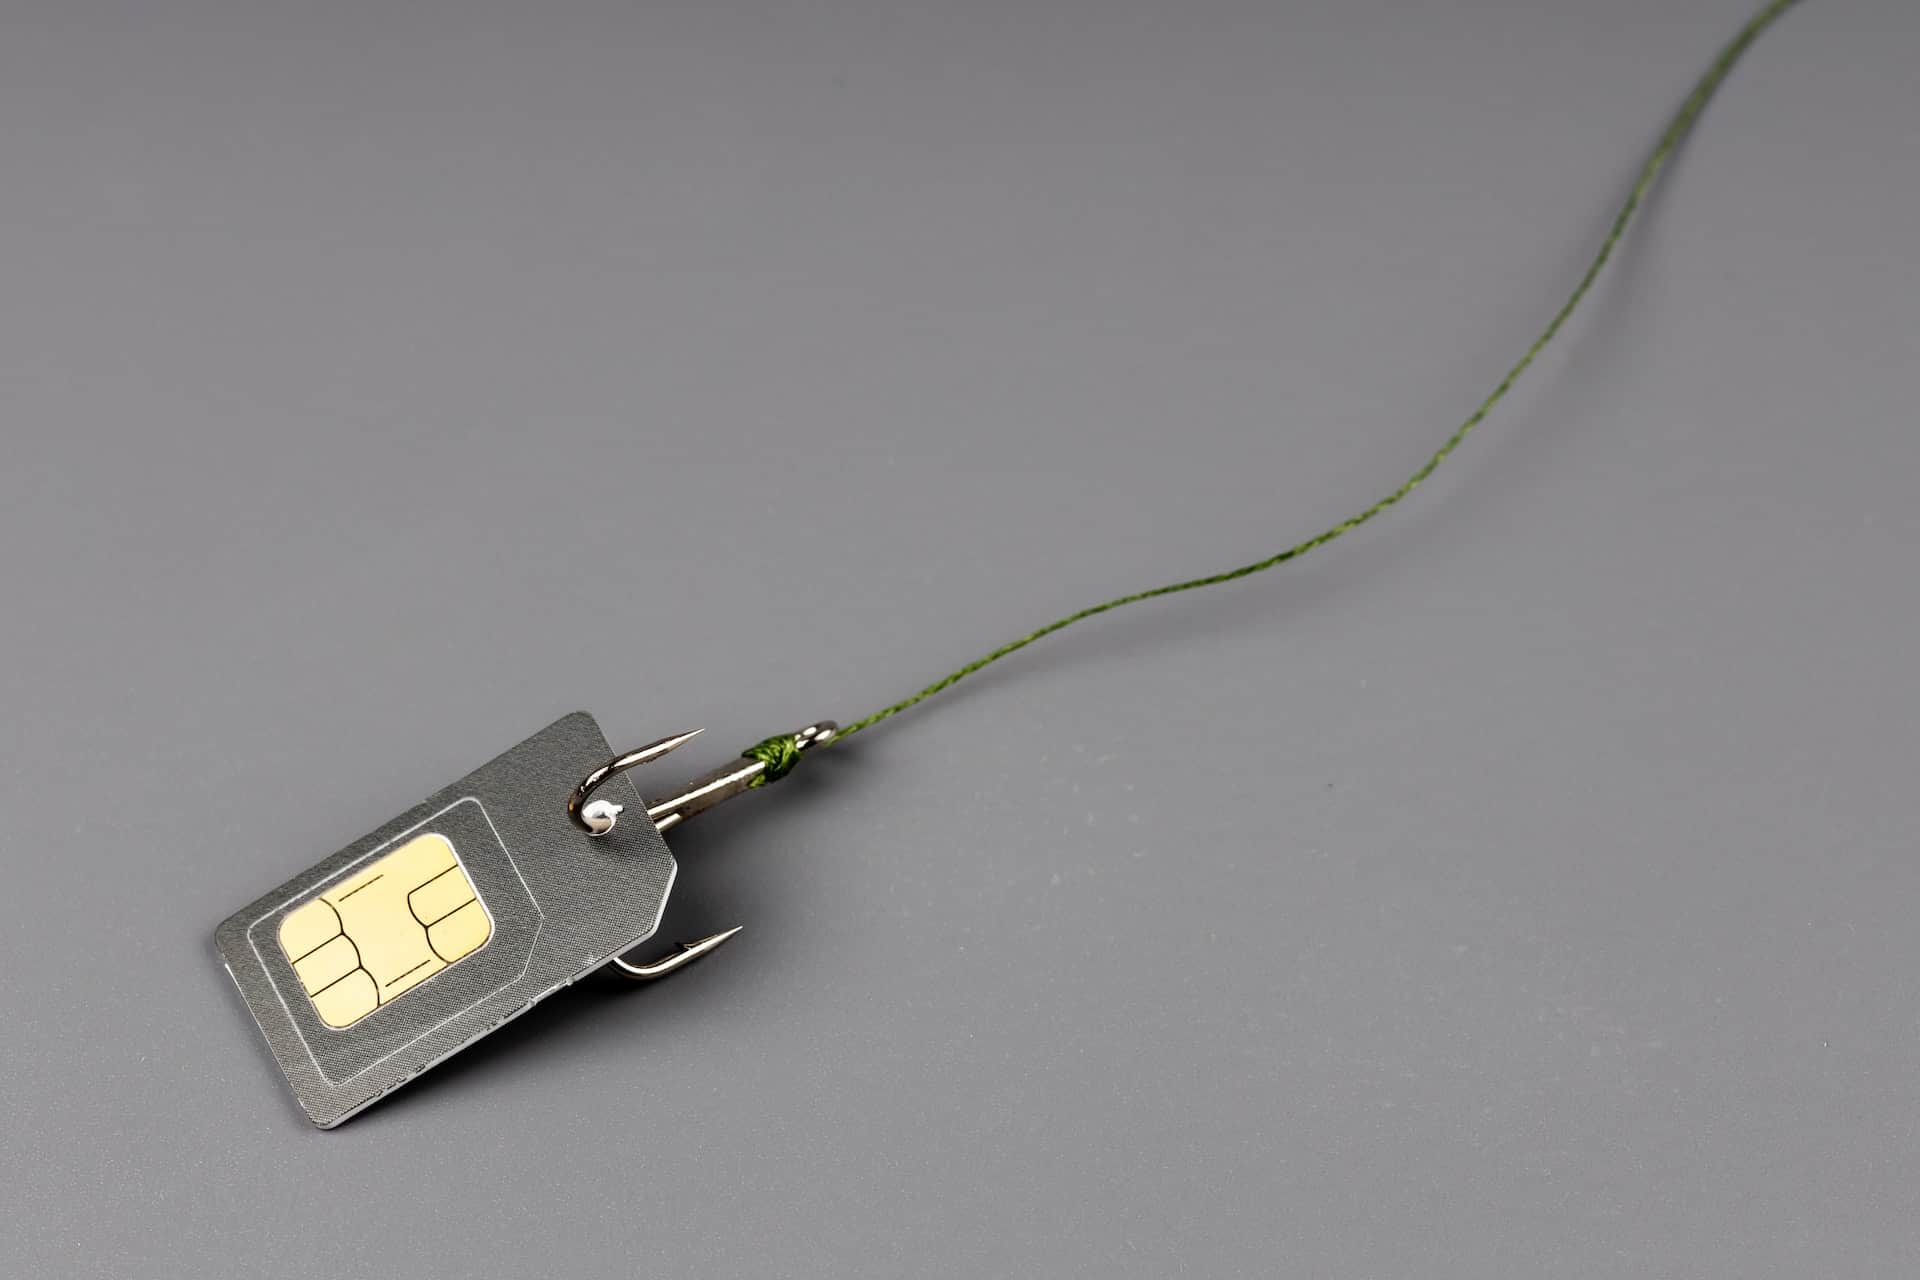 The FBI Warns SIM Swapping Attacks Are Rising. What’s That?